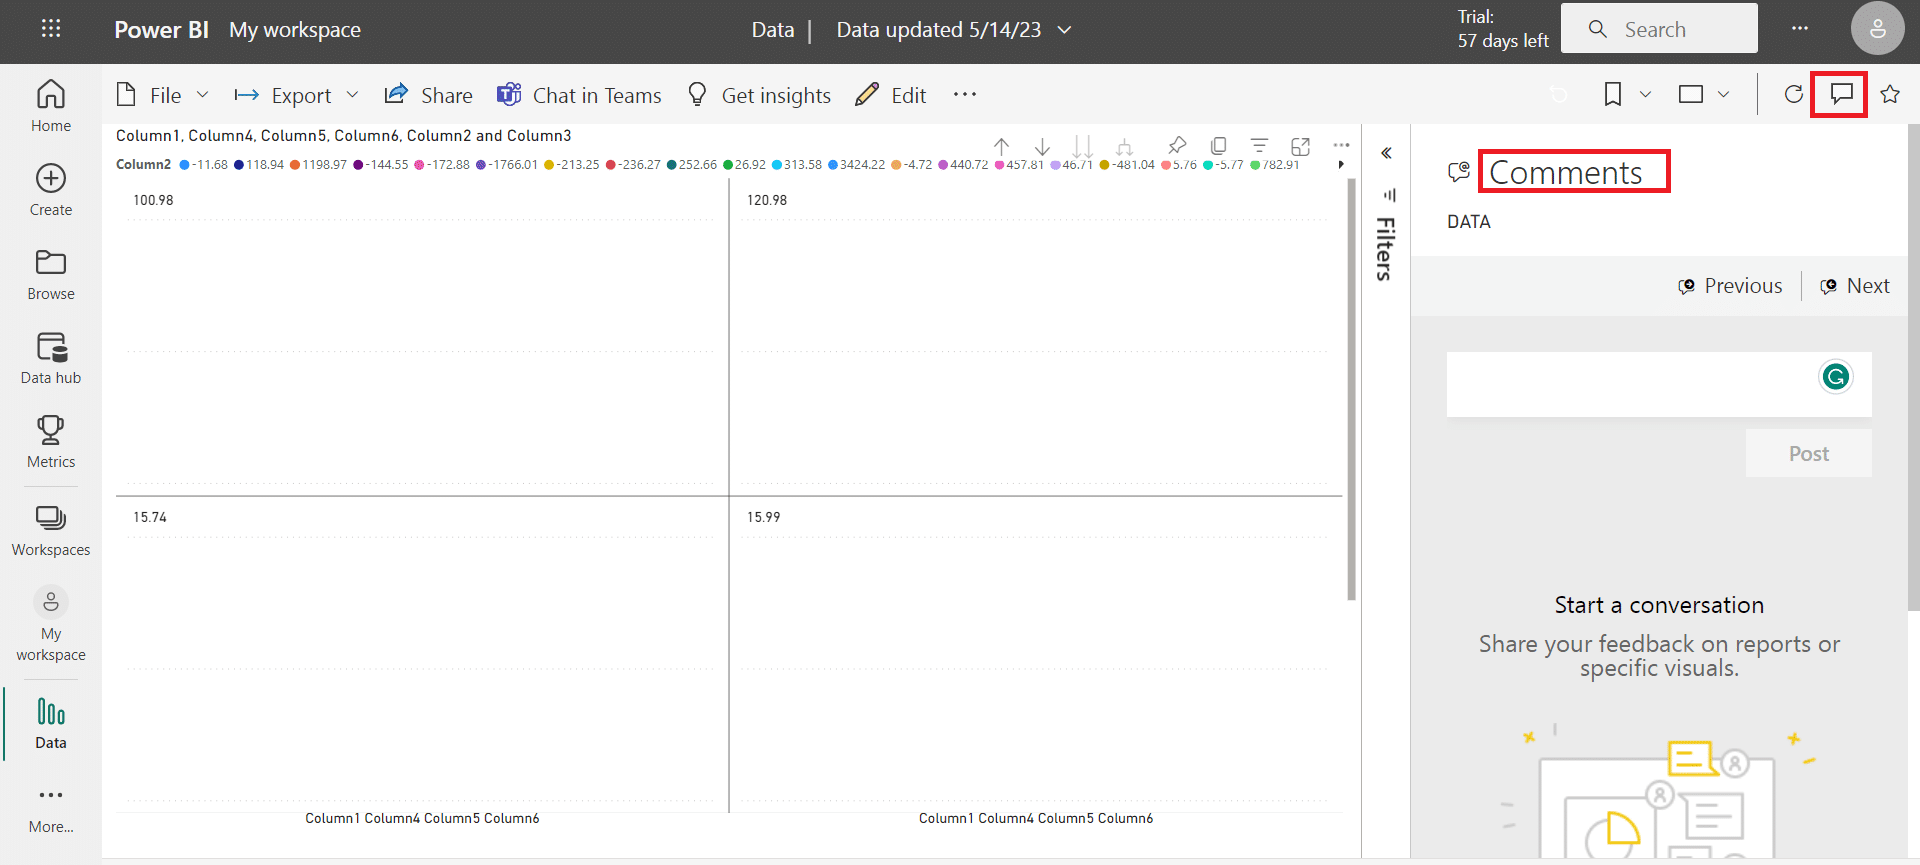 How to add comments to Power BI